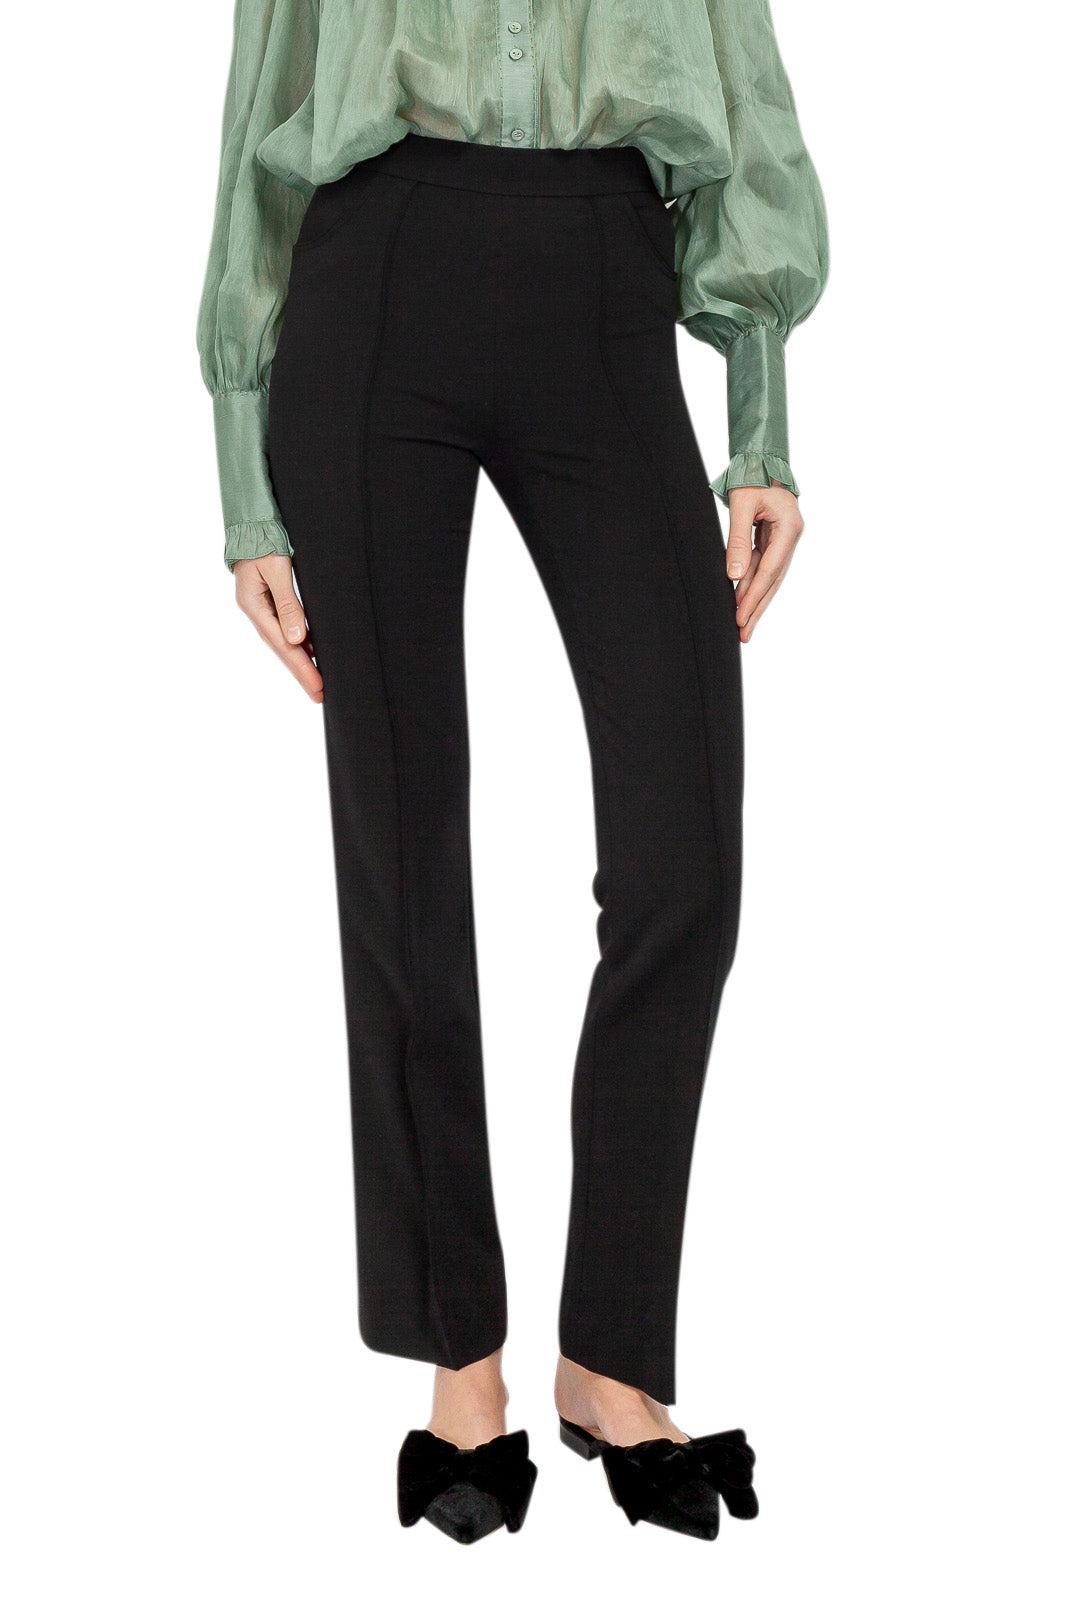 Buy Black Tailored Stretch Skinny Trousers from Next USA